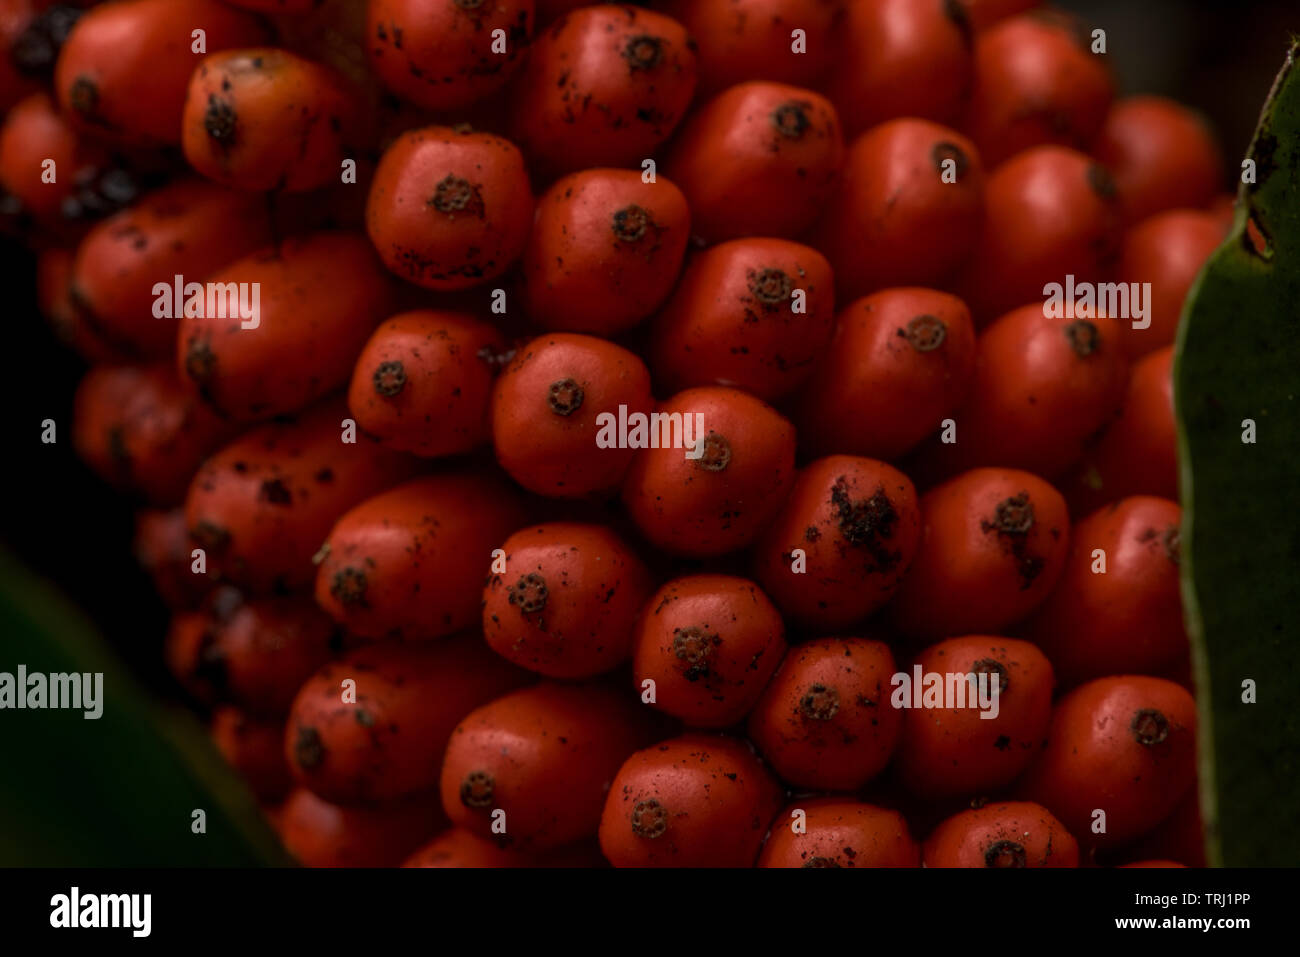 Some sort of red seeds from a plant in the Amazon rainforest in yasuni national park, Ecuador. Stock Photo